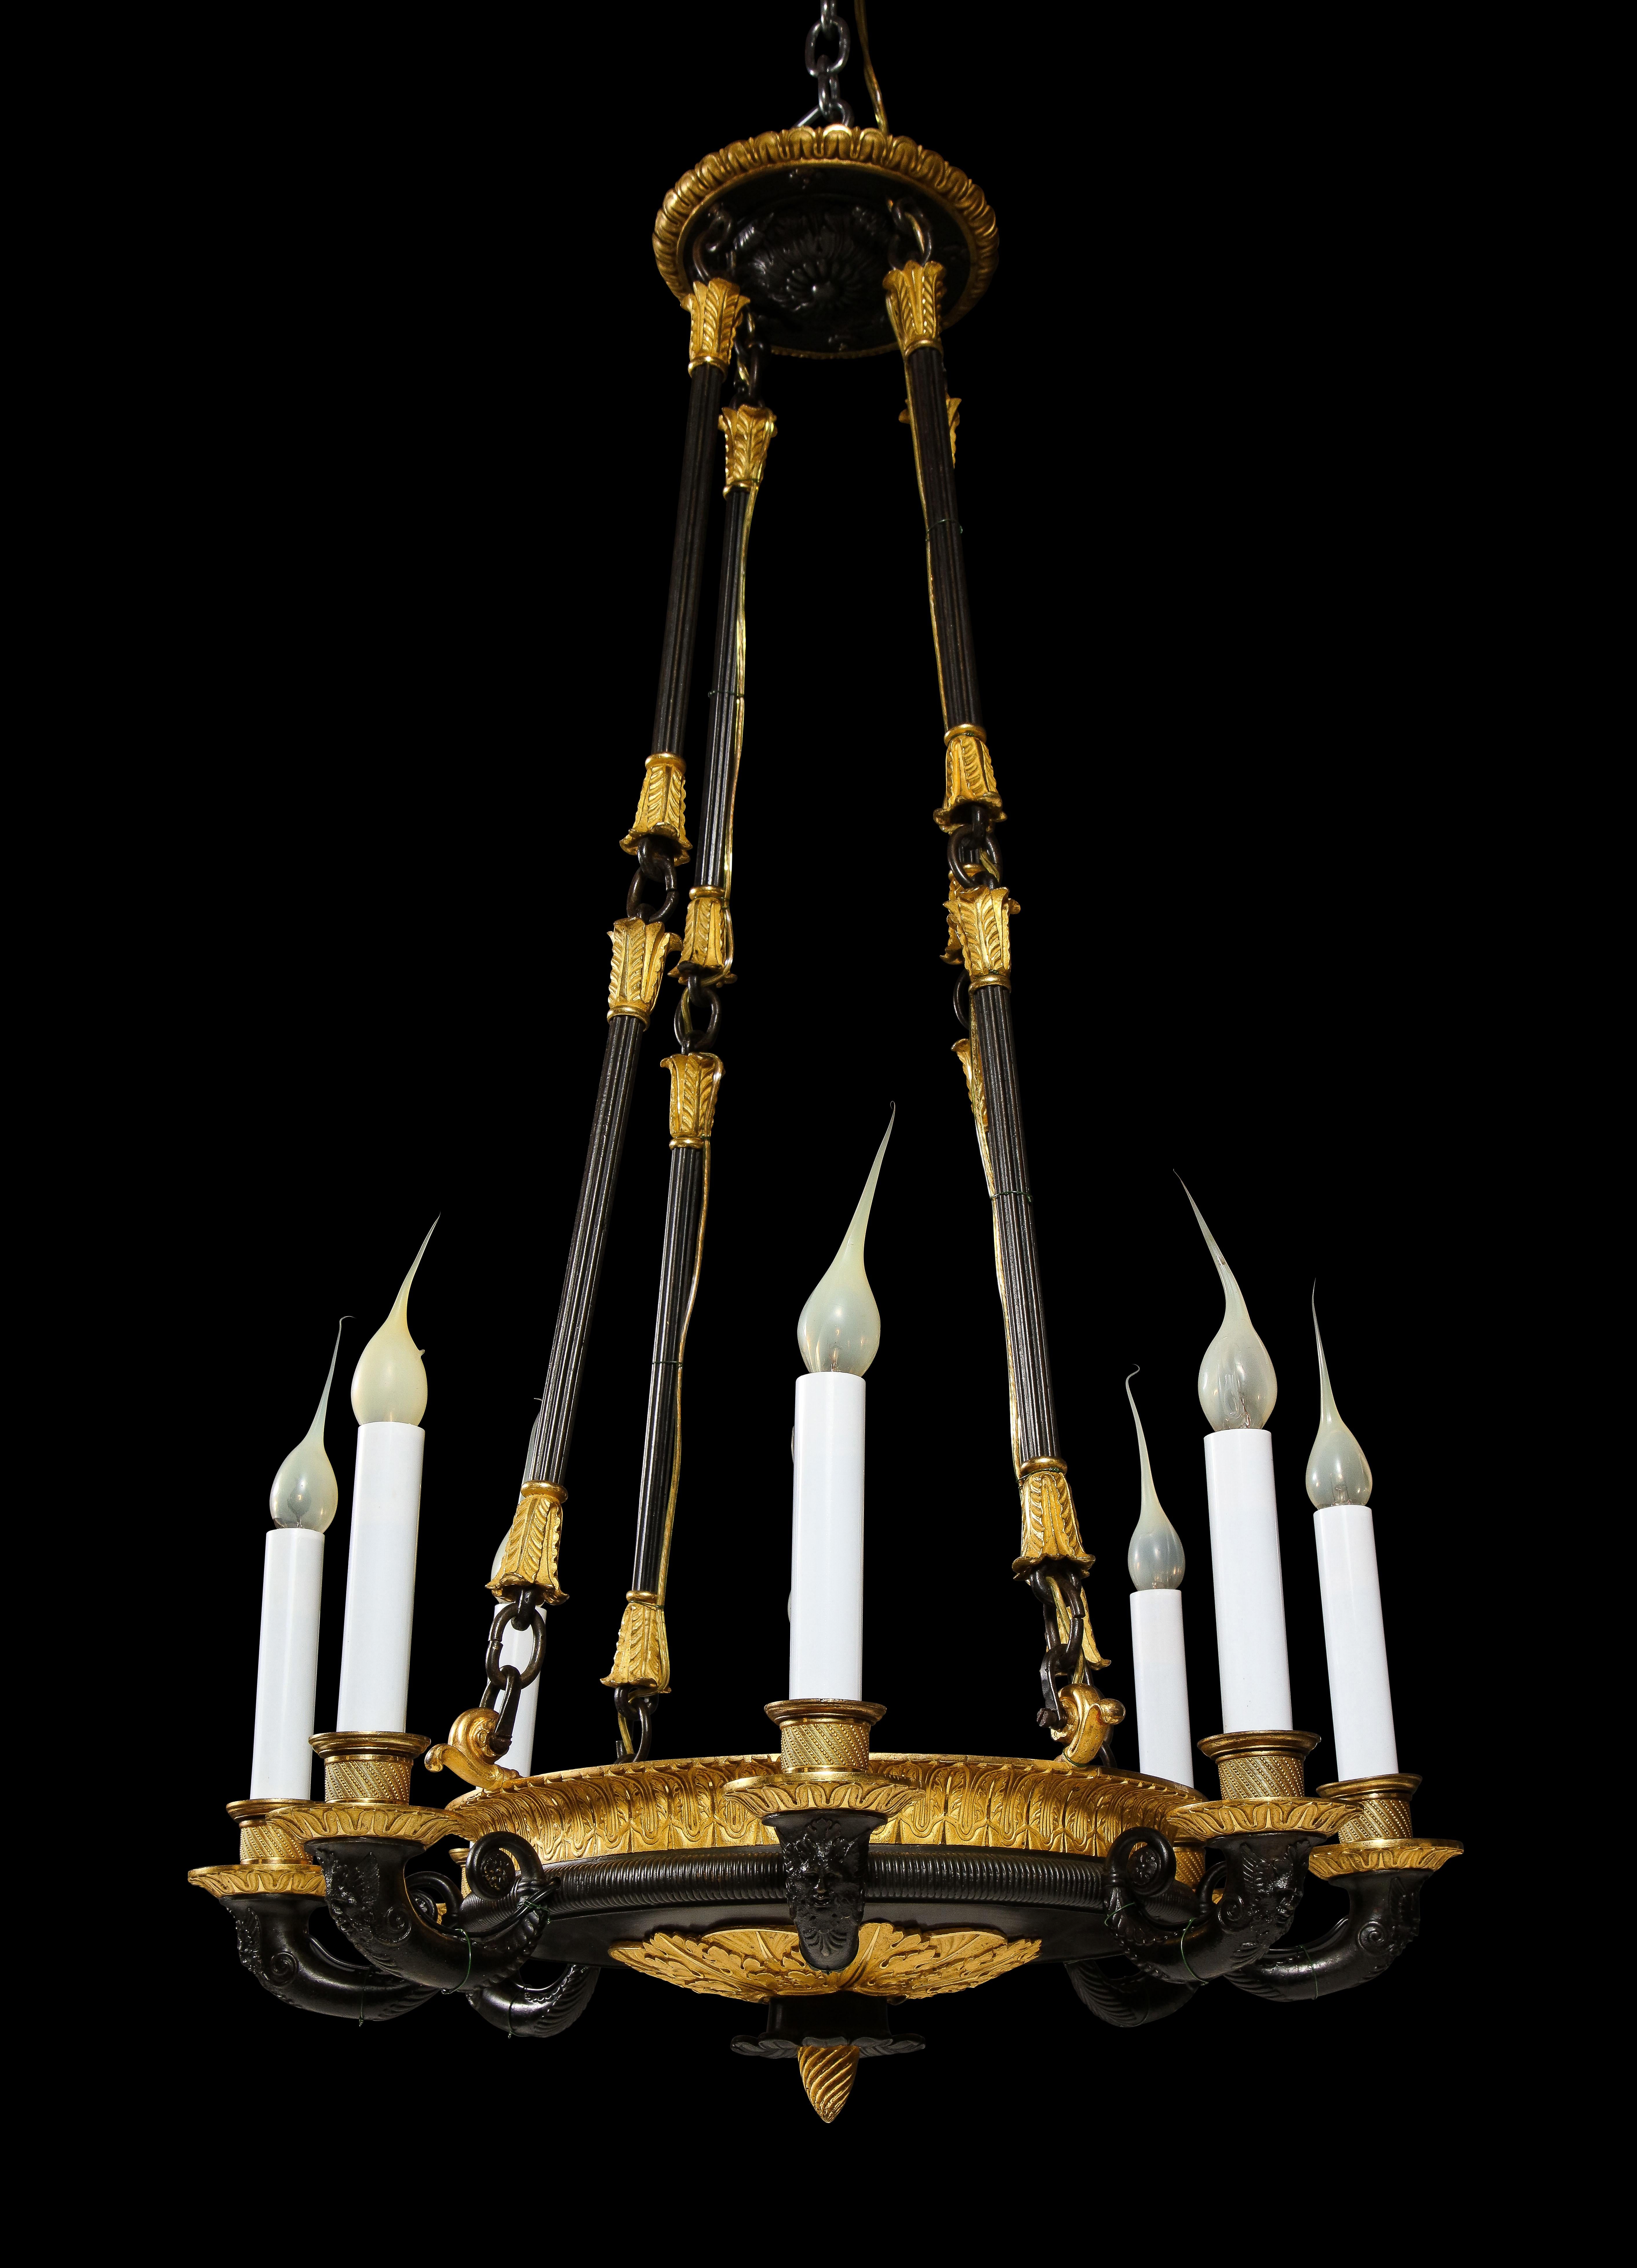 A Superb Antique French Empire style gilt bronze and patinated bronze 8 light chandelier of fine quality. This unique neoclassical chandelier is embellished with figural masks and neoclassical motifs further adorned with a top original canopy.